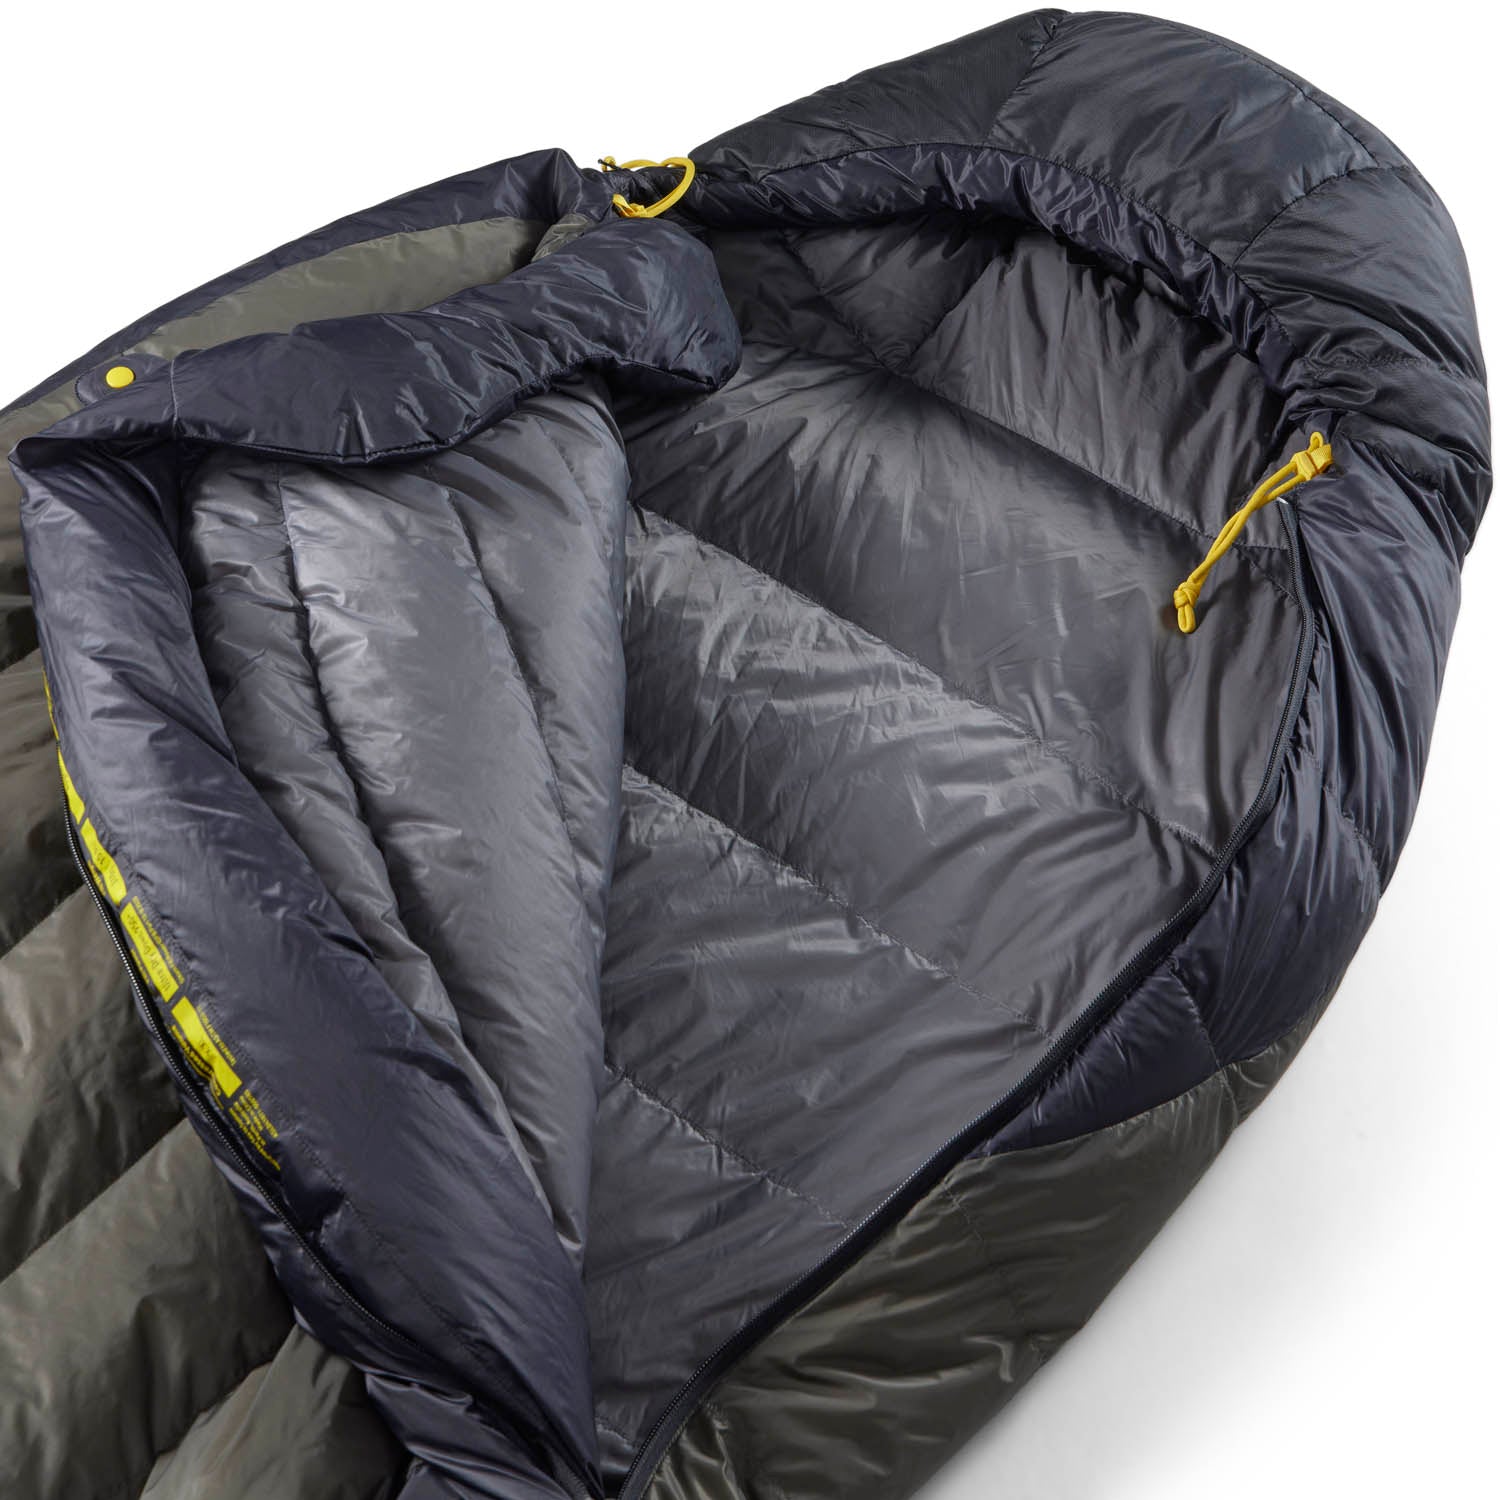 -1C|30F || Spark Pro Down Sleping Bag